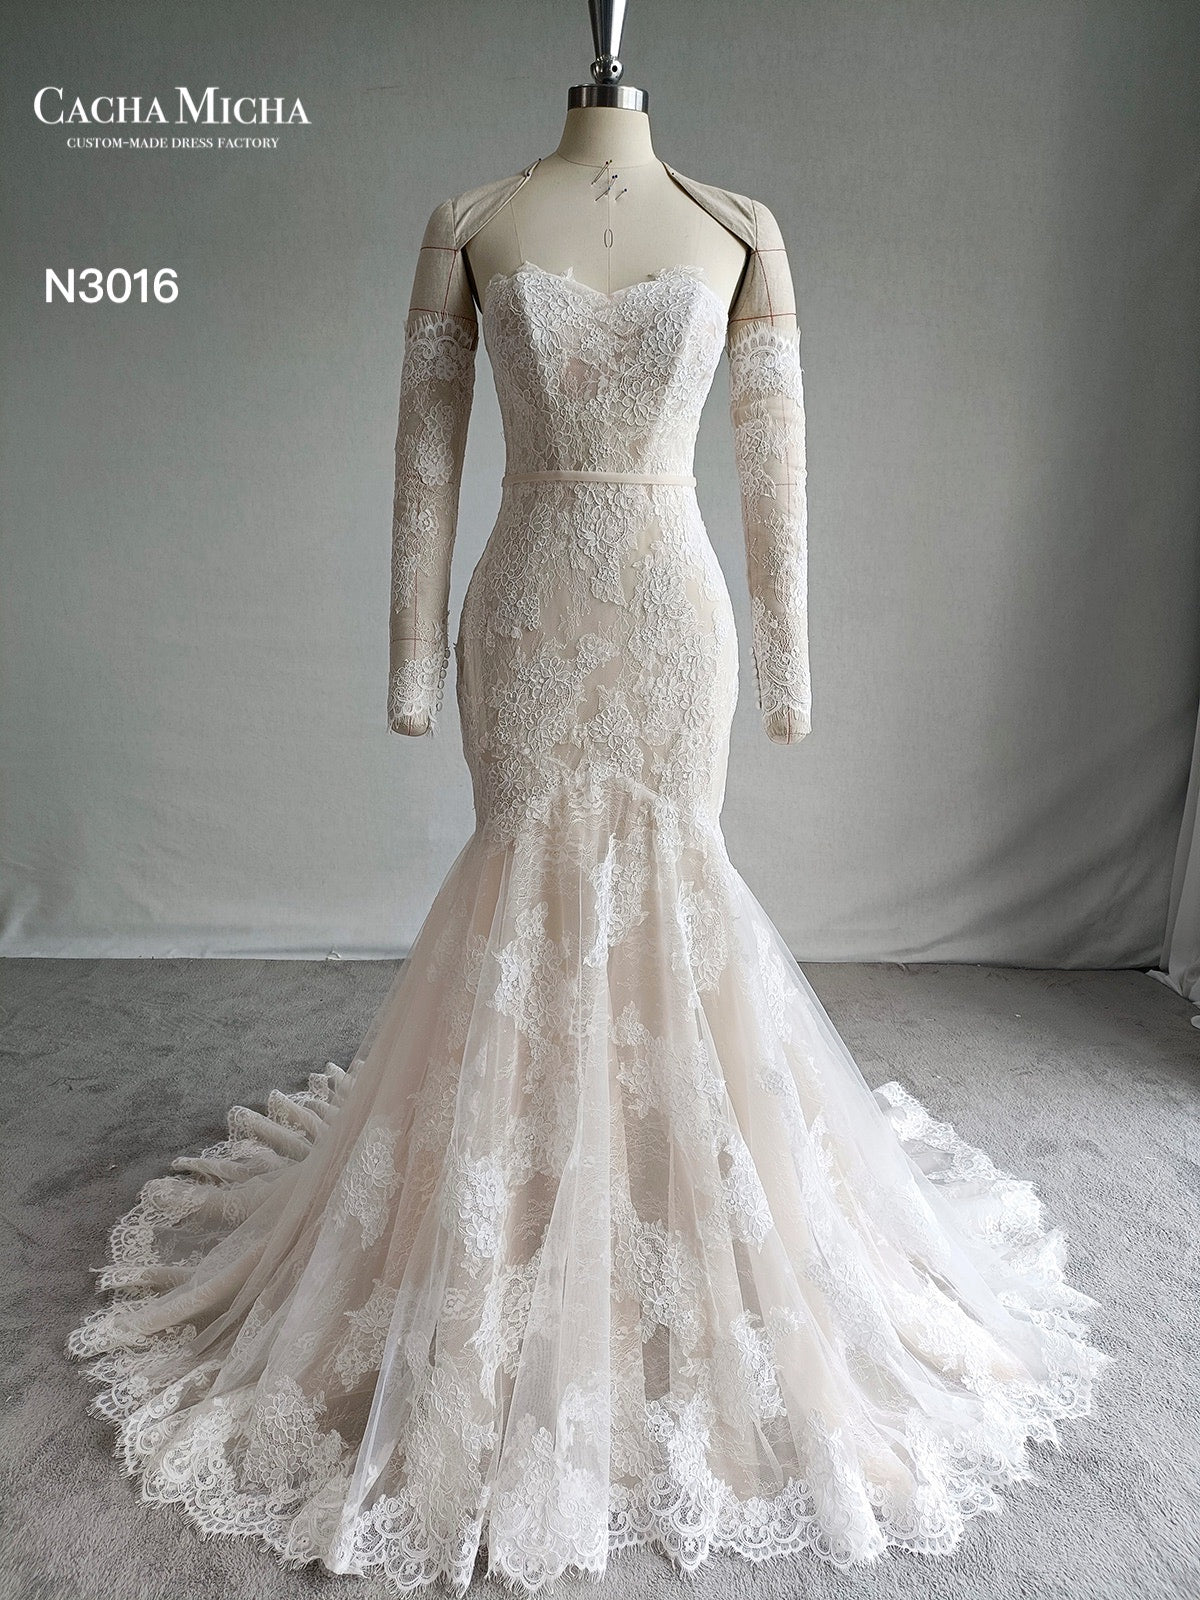 Champagne Color Mermaid Design French Lace Wedding Dress N3016